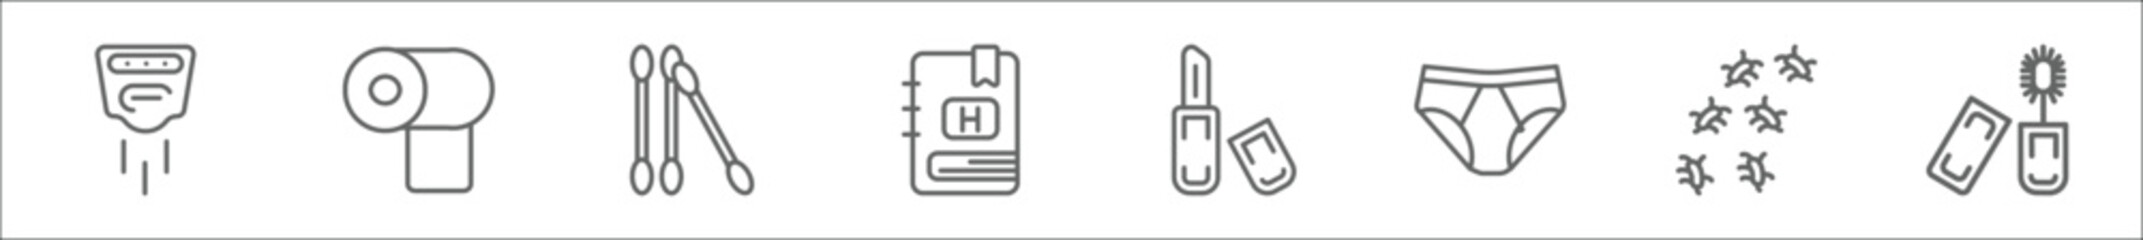 outline set of hygiene line icons. linear vector icons such as hand dryer, tissues, cotton swabs, appointment book, lip balm, underwear, microbes, dolled up